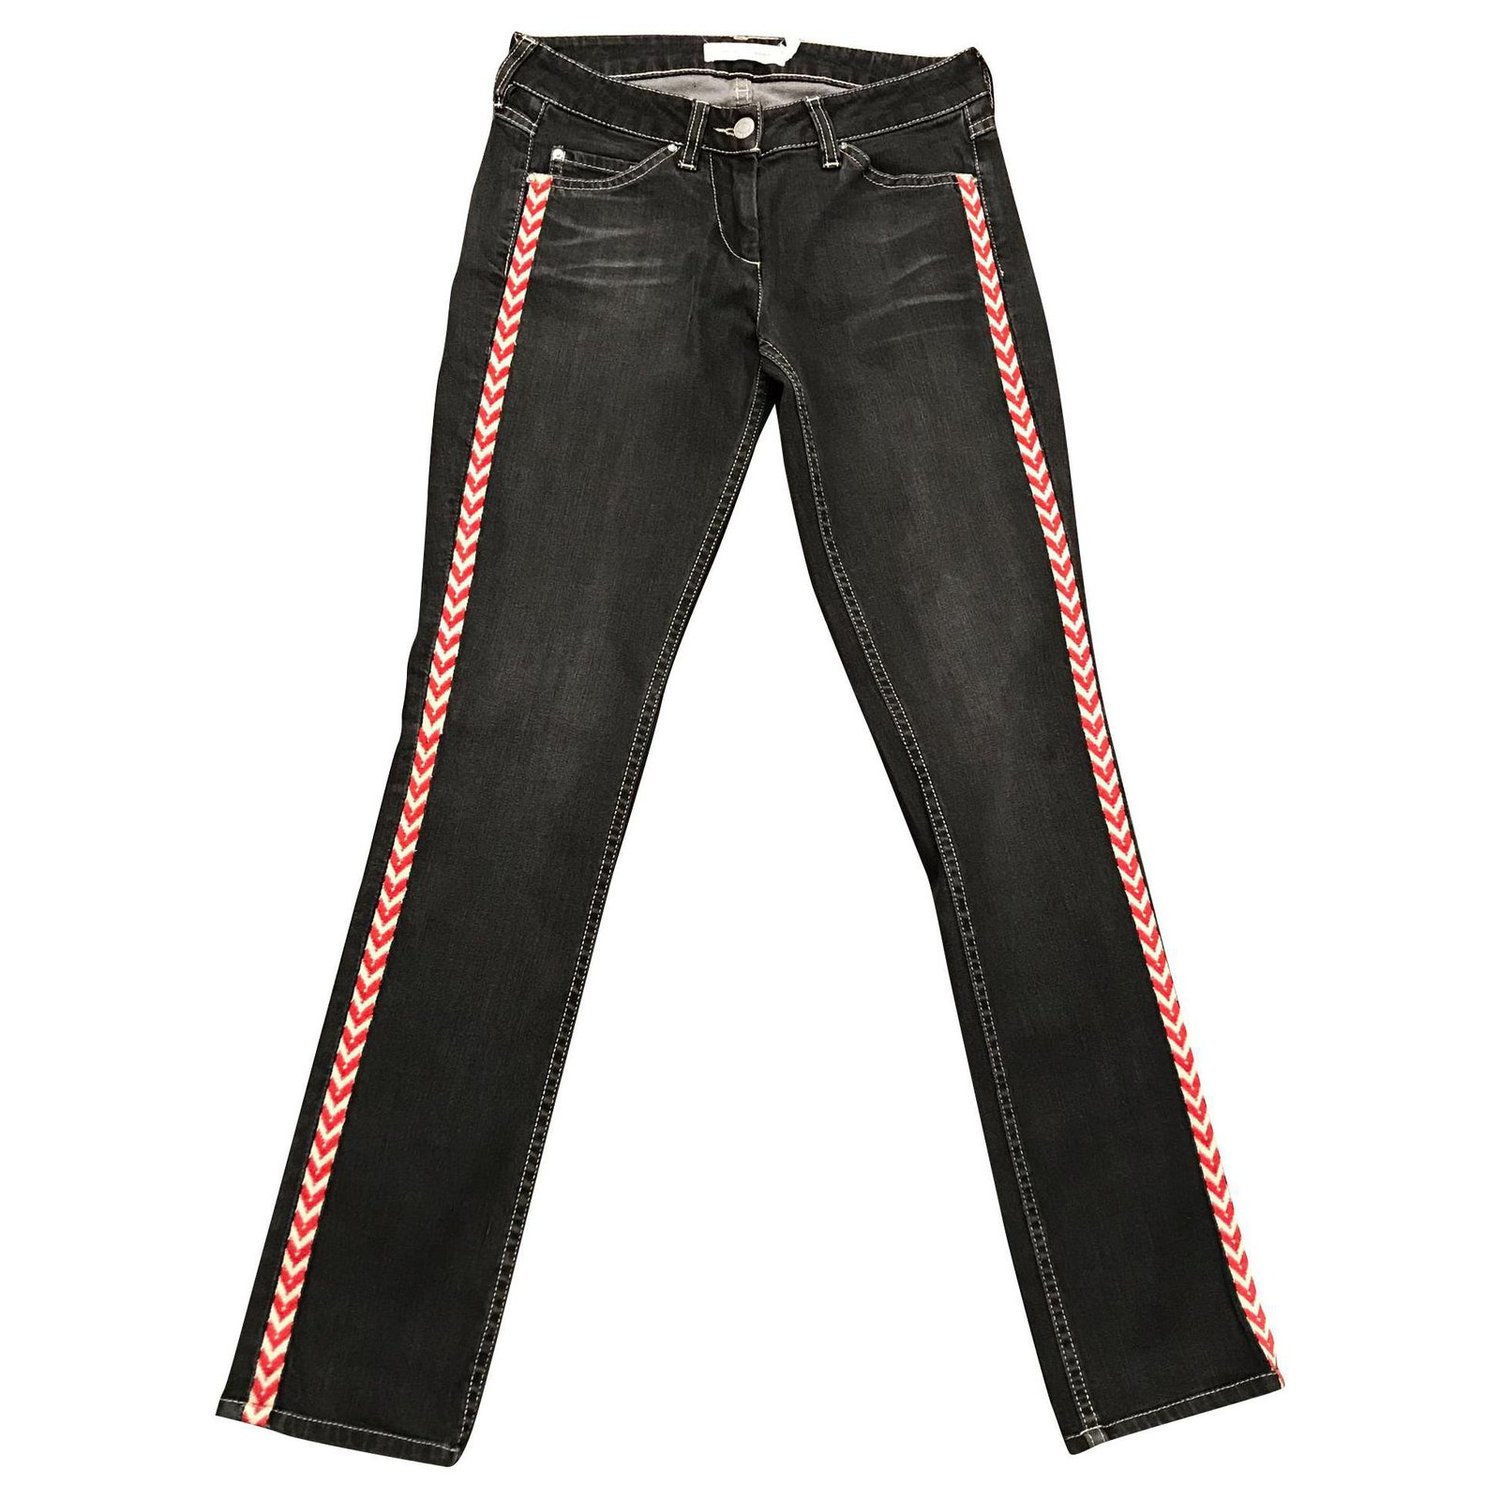 Étoile Isabel Marant Embroidered Skinny Jeans in Black — UFO No More